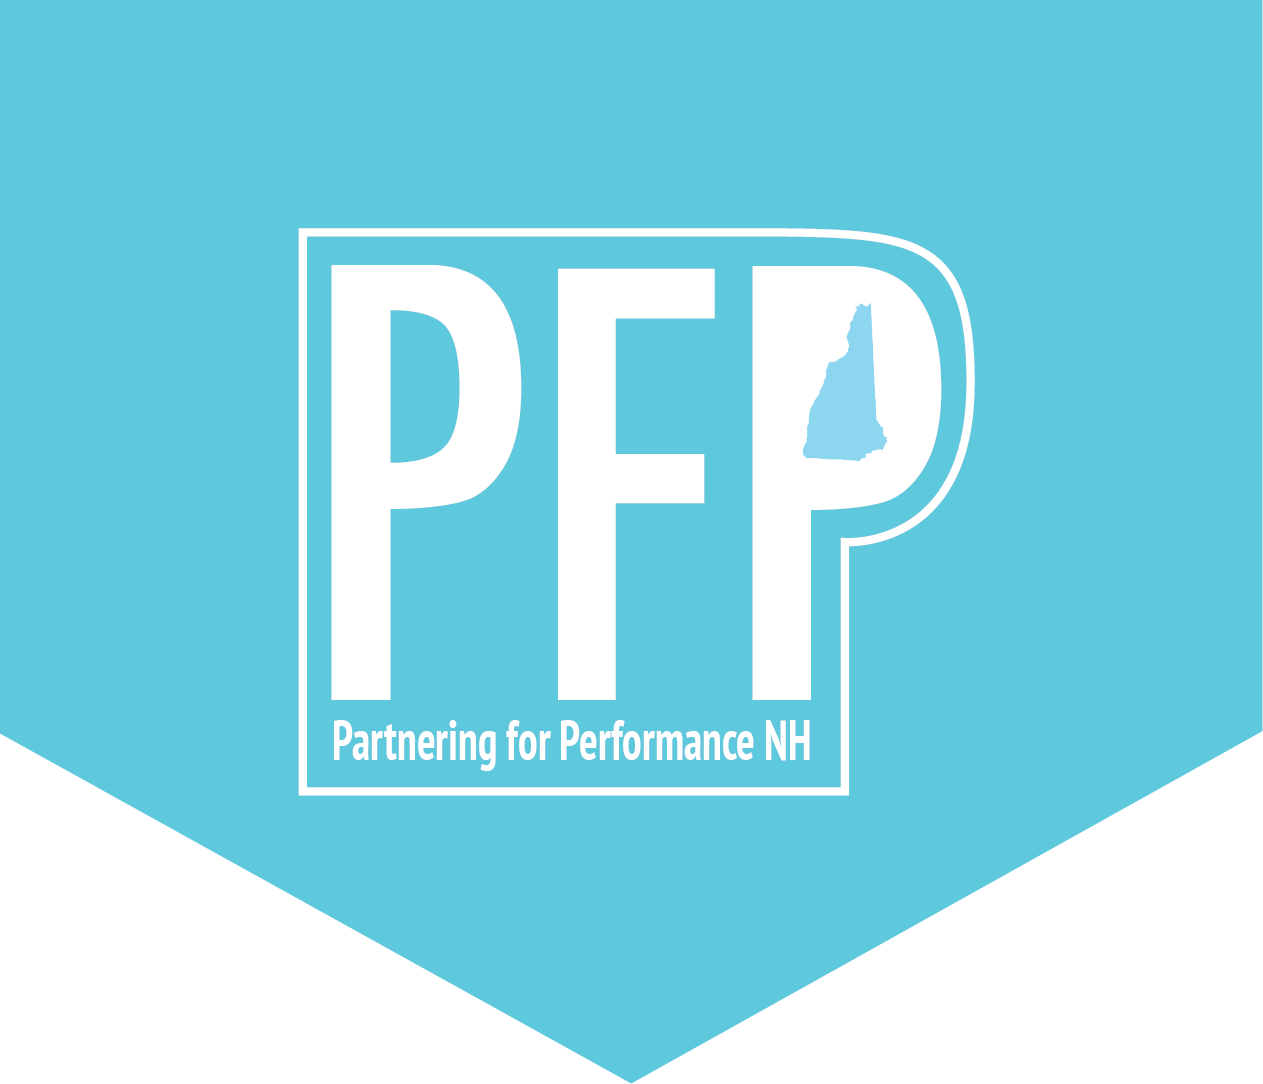 Partnering for Performance New Hampshire